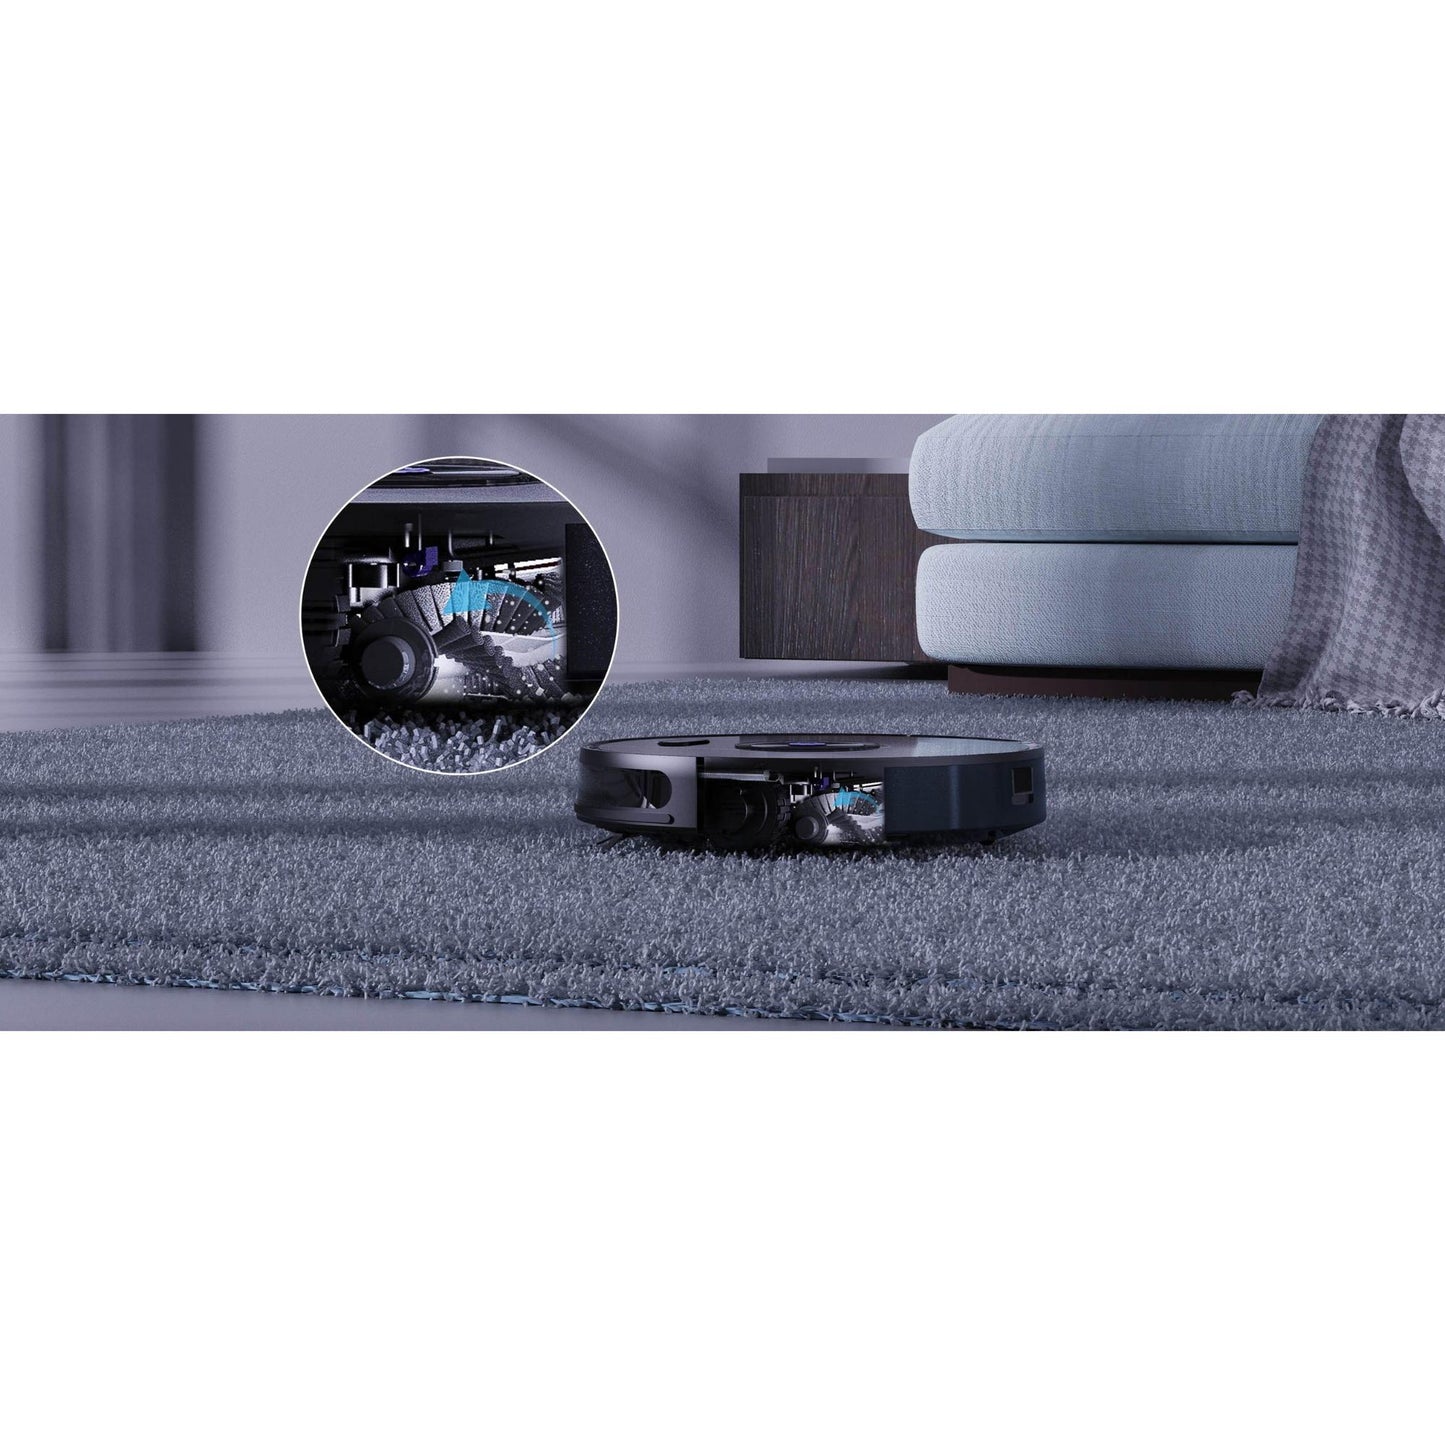 Innovative robot vacuum effectively removing dust and debris. | Blue Chilli Electronics.